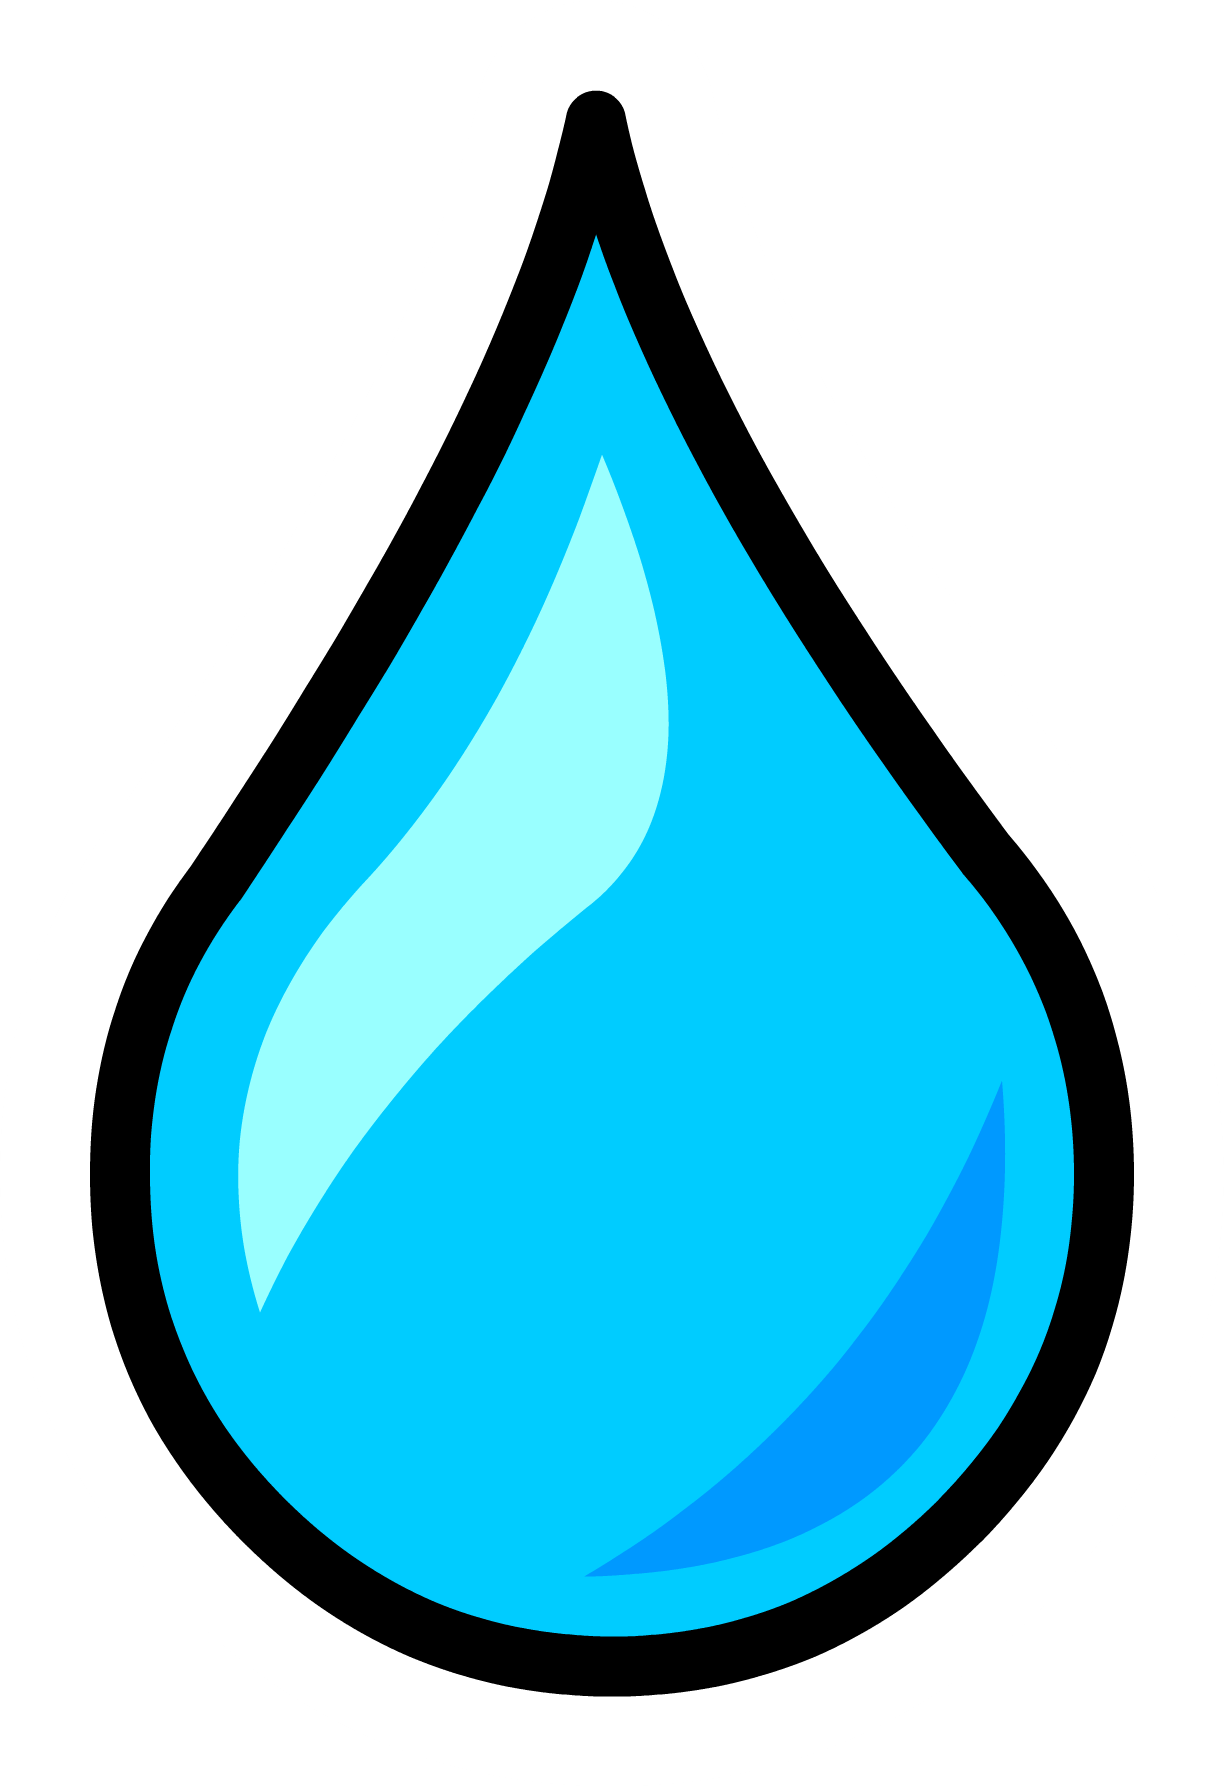 Water Droplet Clipart Png